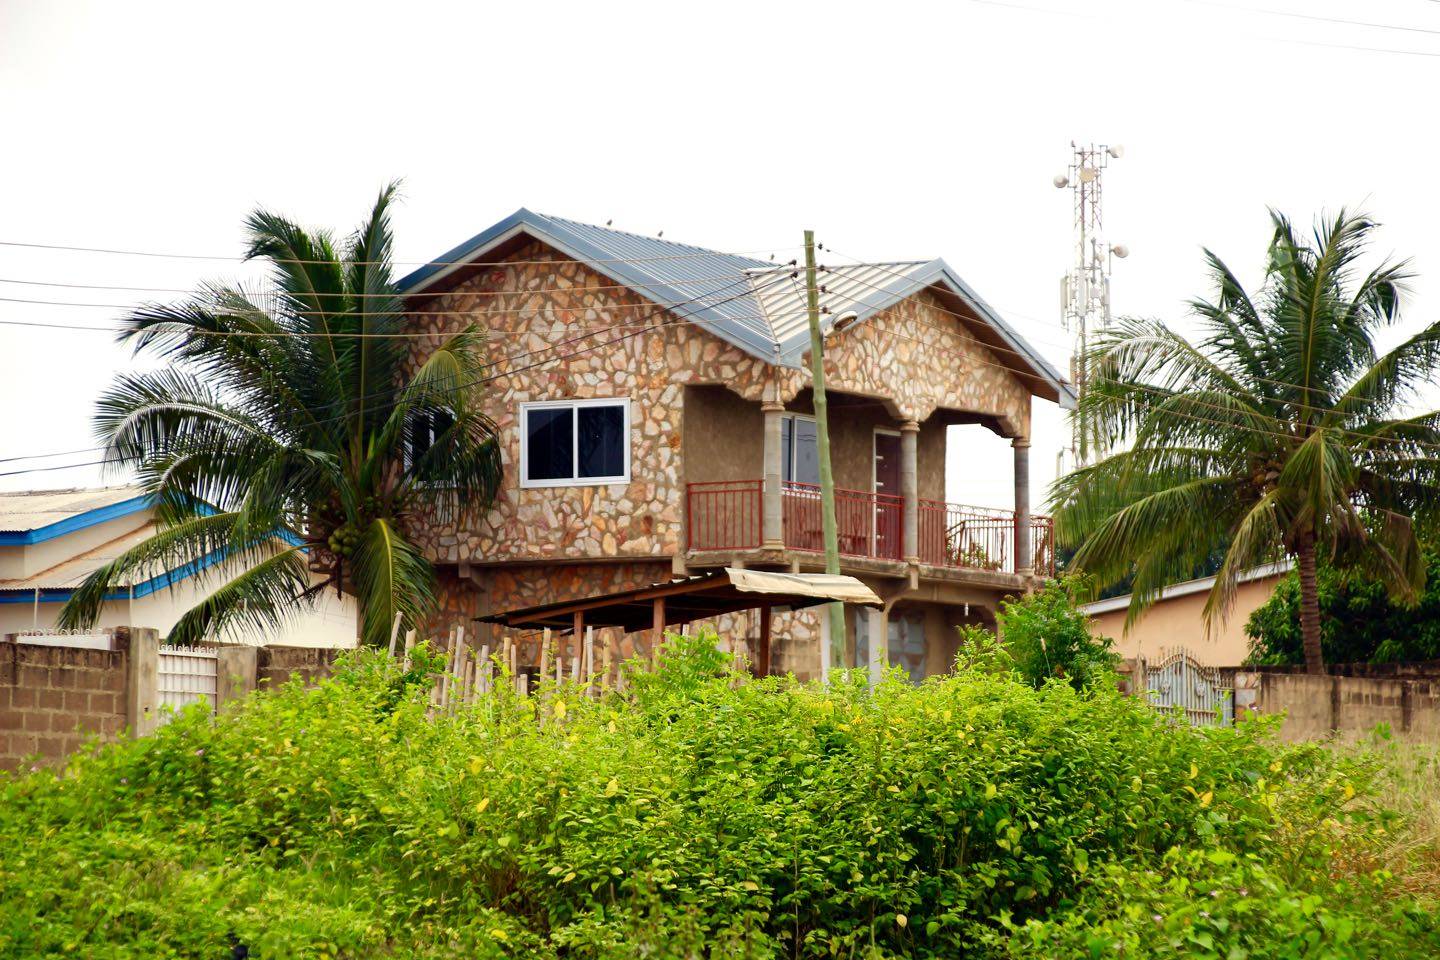 House in Spintex Accra